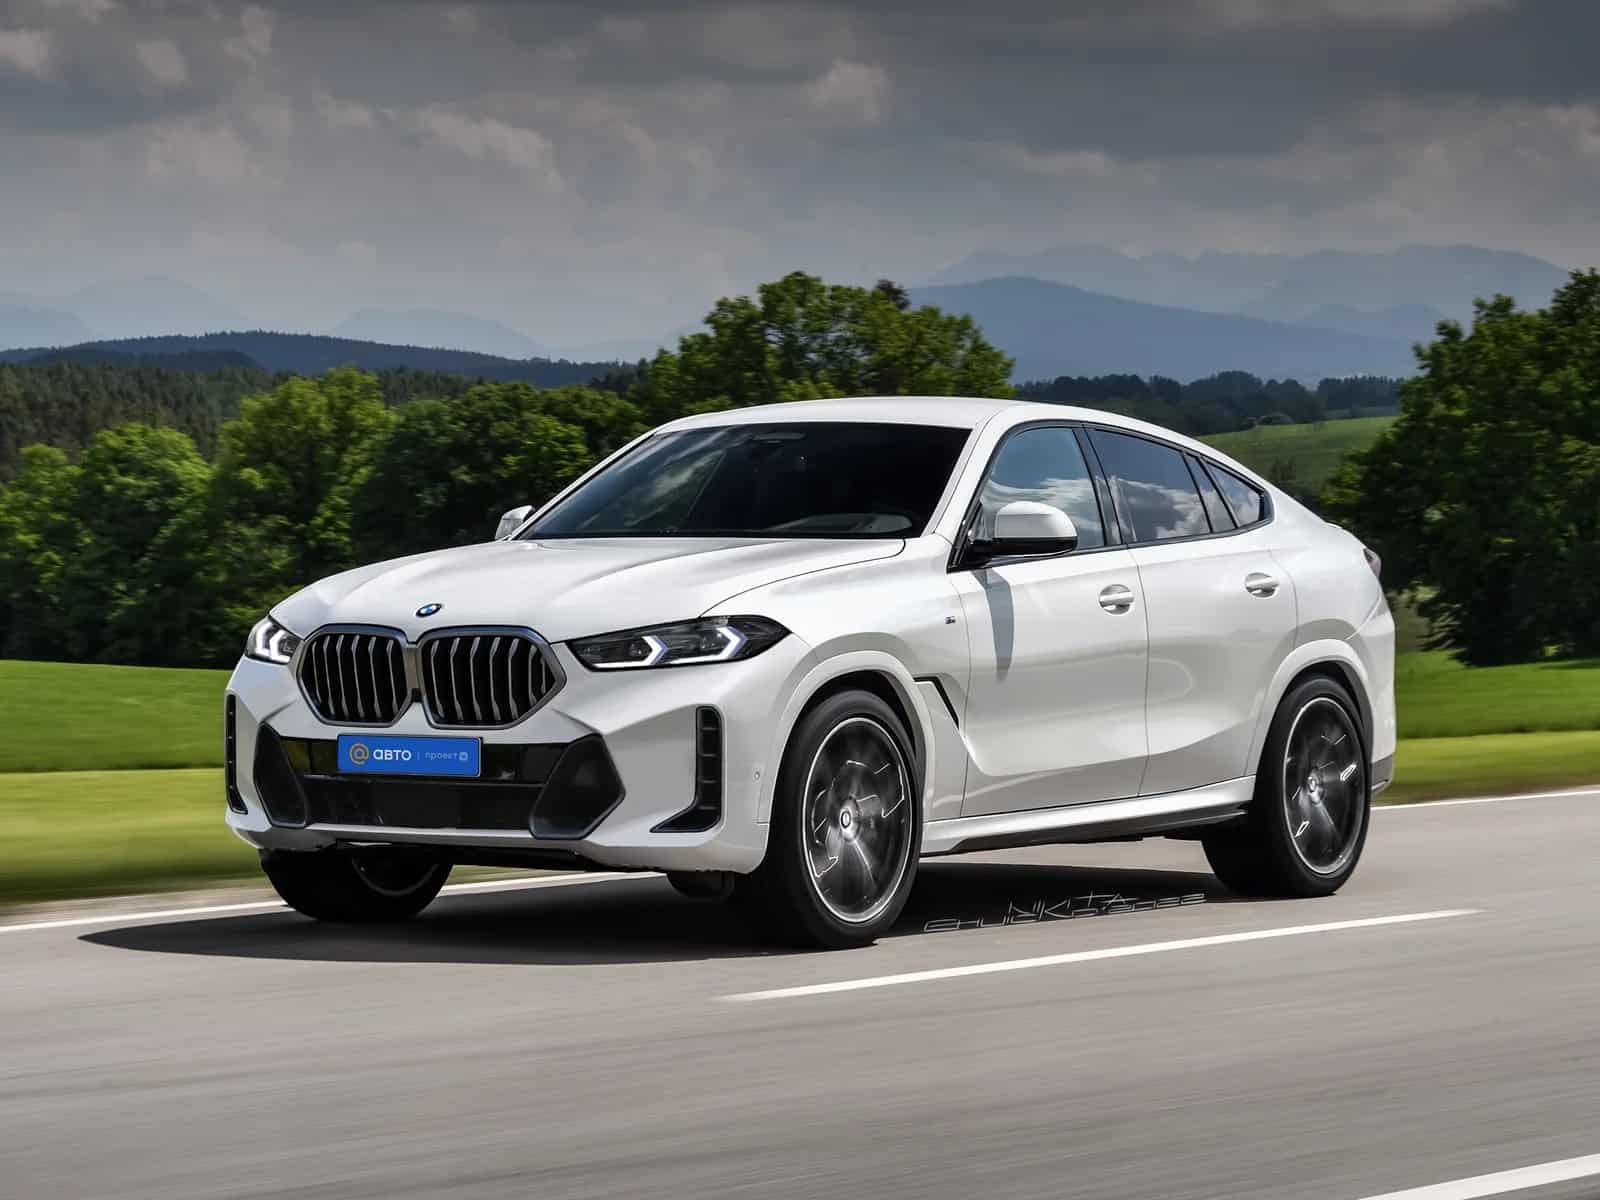 2023 BMW X6 Facelift Speculatively Rendered Based On Spy Shots